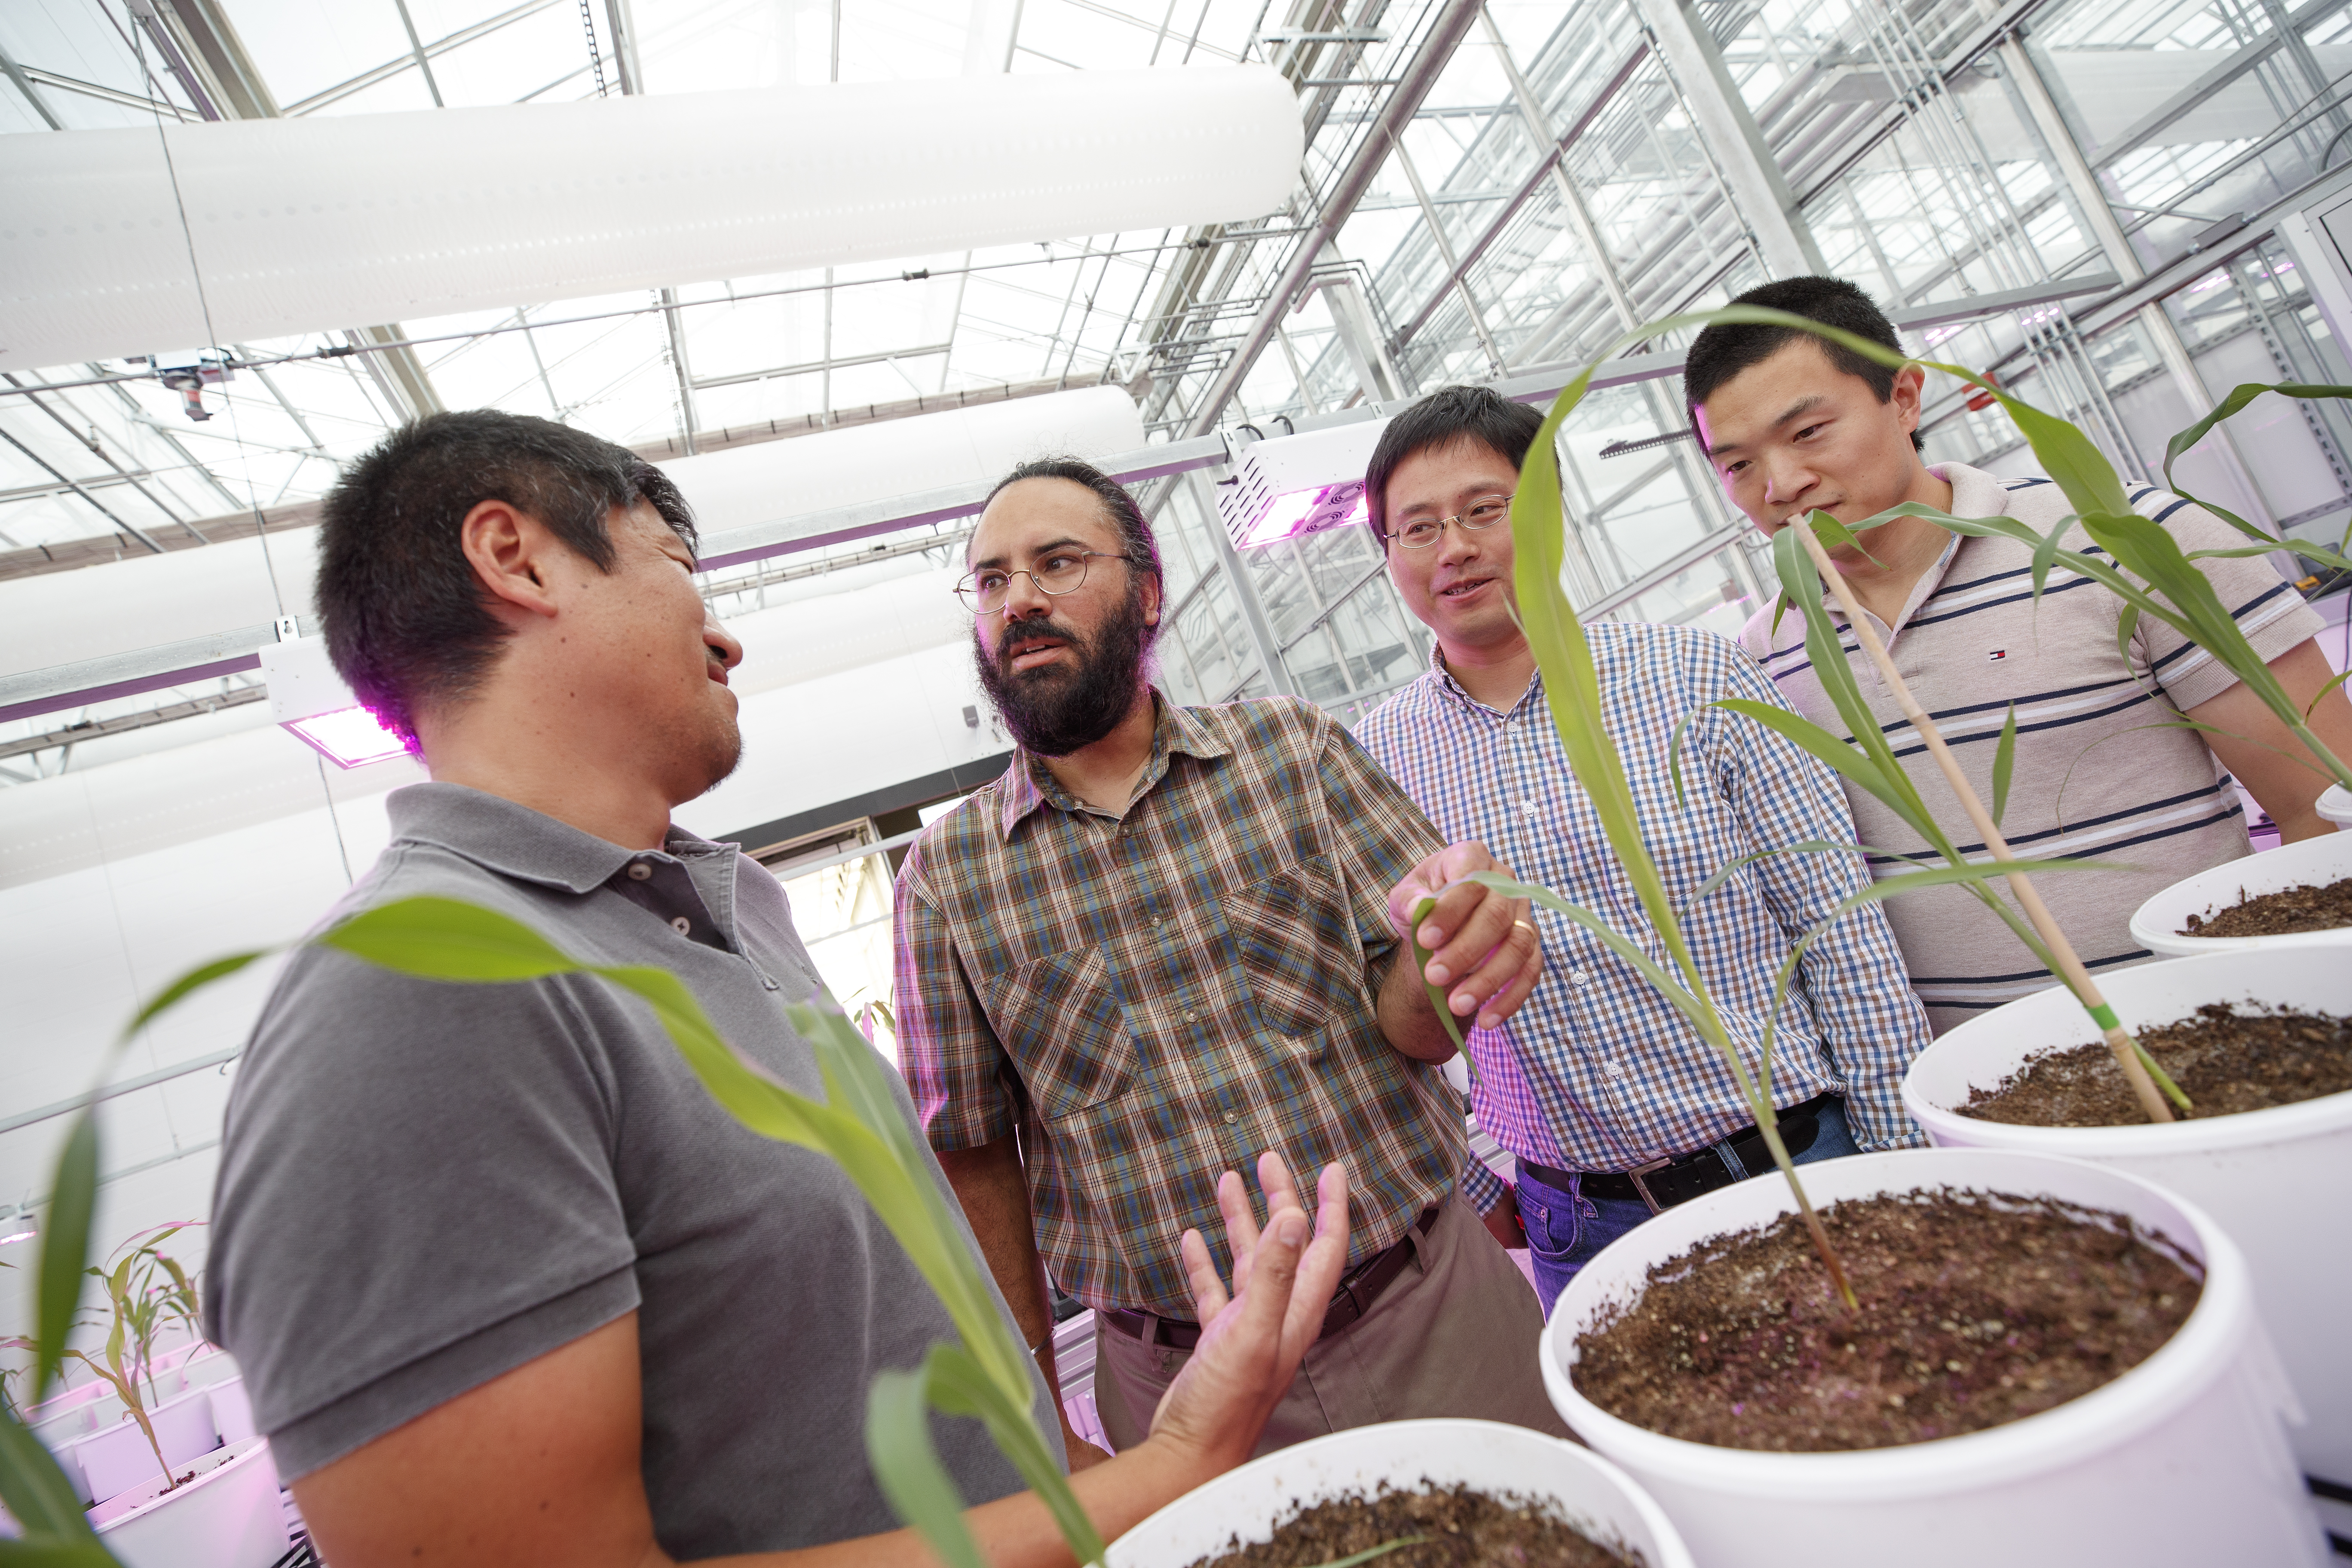 Harkamal Walia (second from left) discusses an experimental plan for the grant at the High Throughput Phenotyping facility at the Greenhouse Innovation Center on Nebraska Innovation Campus. From left is Toshihiro Obata, Hongfeng Yu and Qi Zhang. Not pictured are researchers Chi Zhang and Gota Morota.